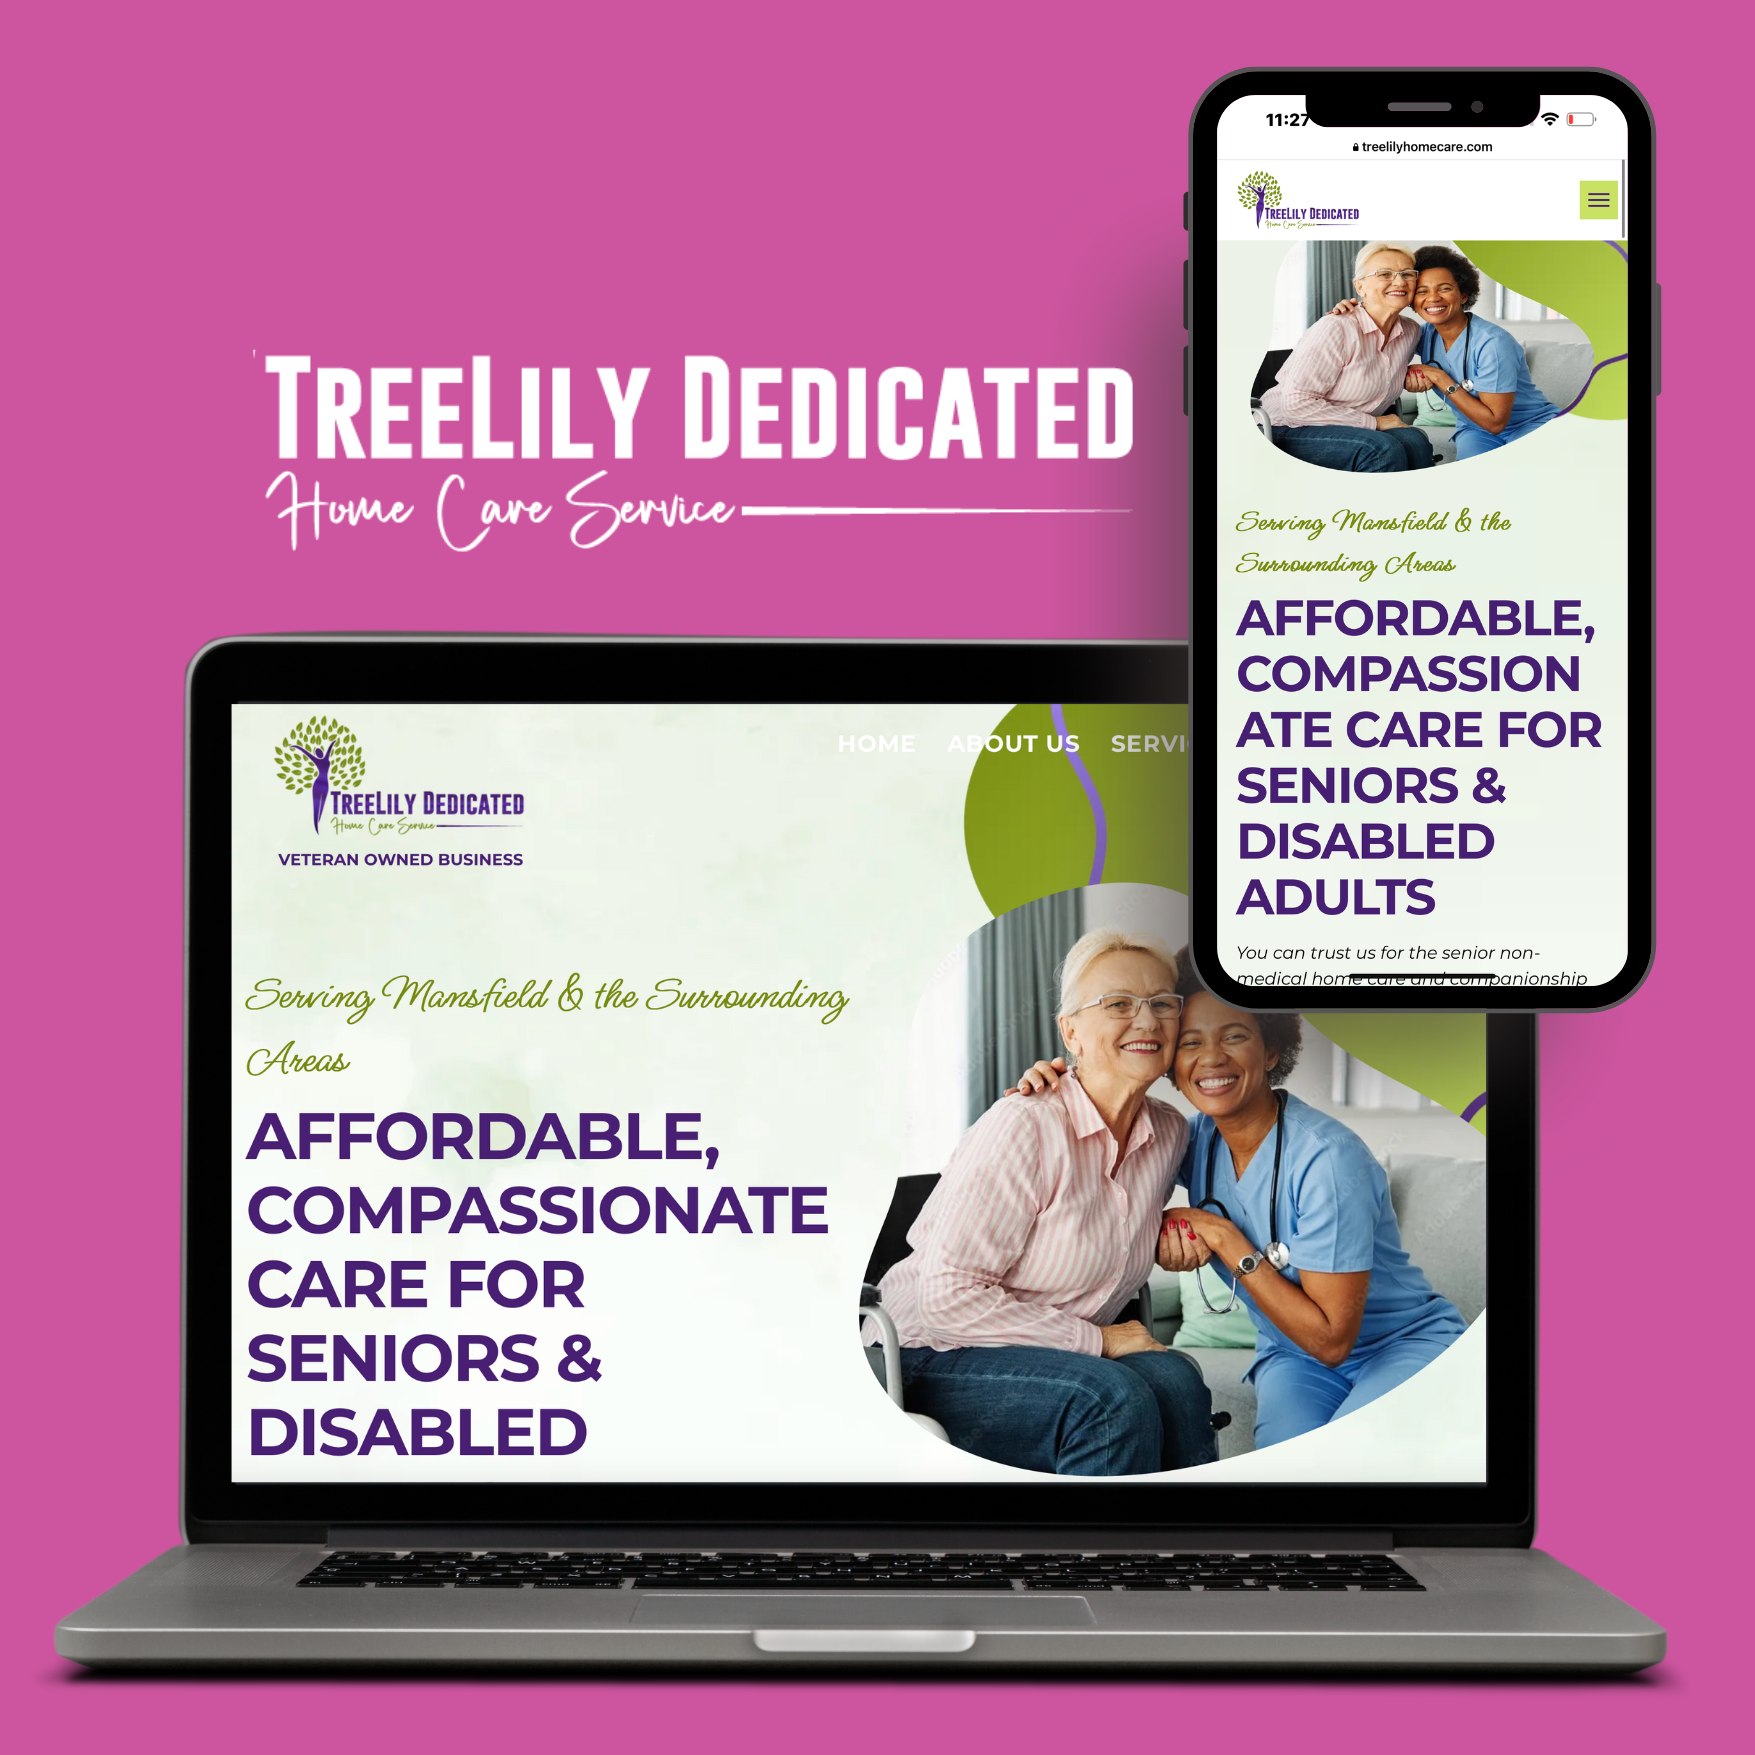 A laptop and a cell phone are displaying a website for treelily dedicated home care service